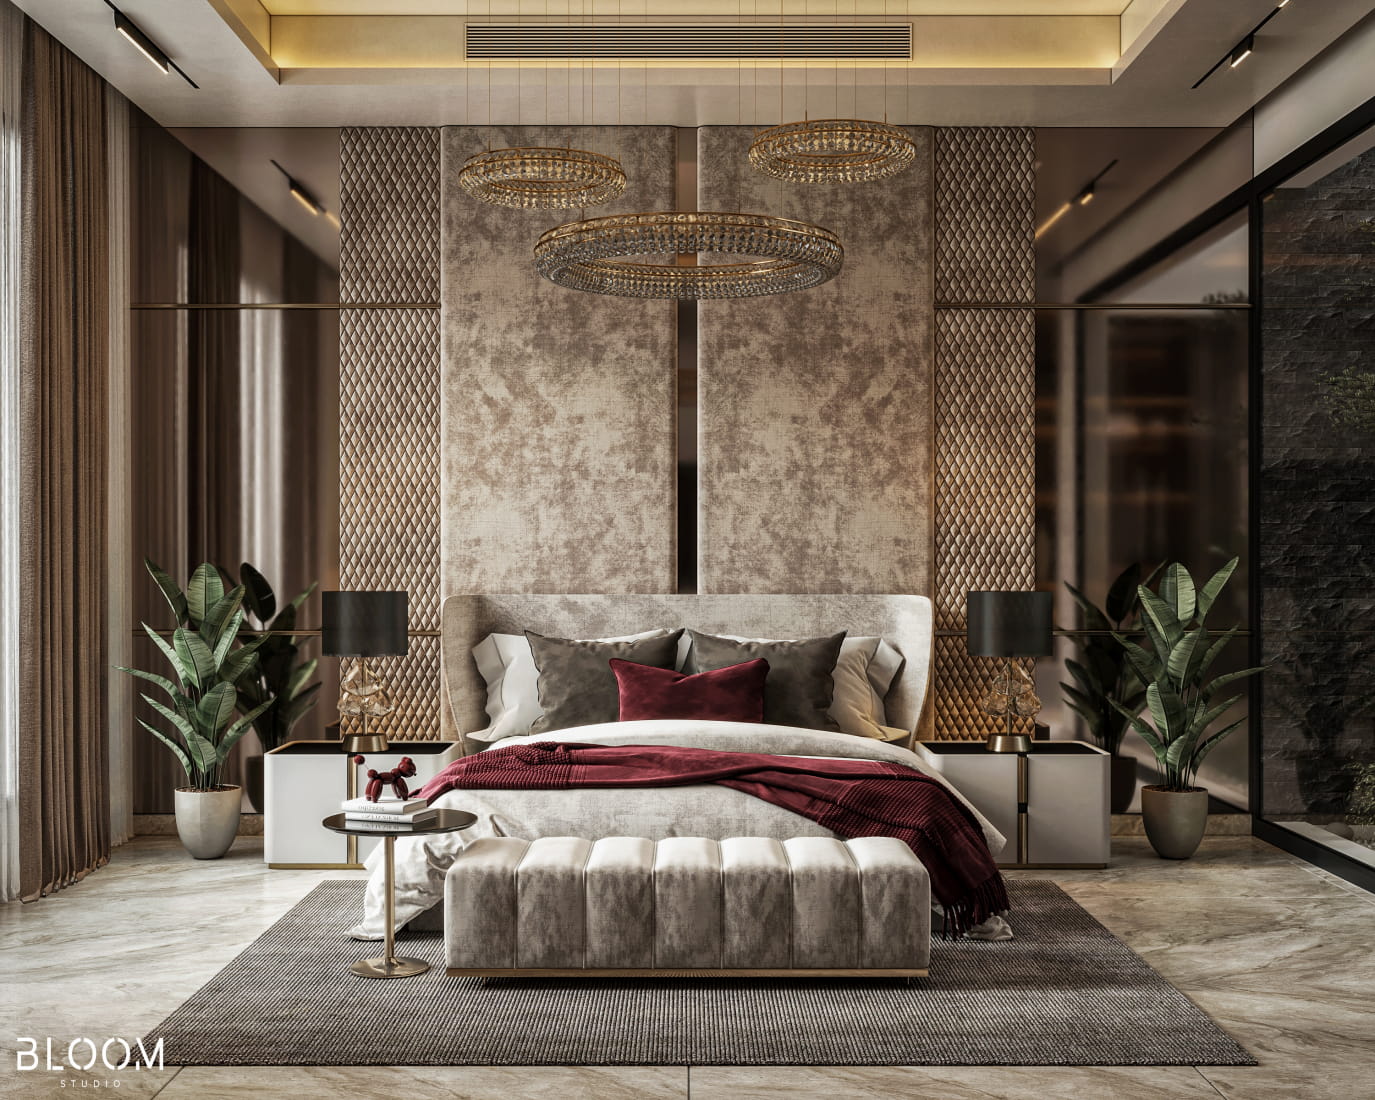 48 LUXURY BEDROOMS: REST, RELAX AND INDULGE